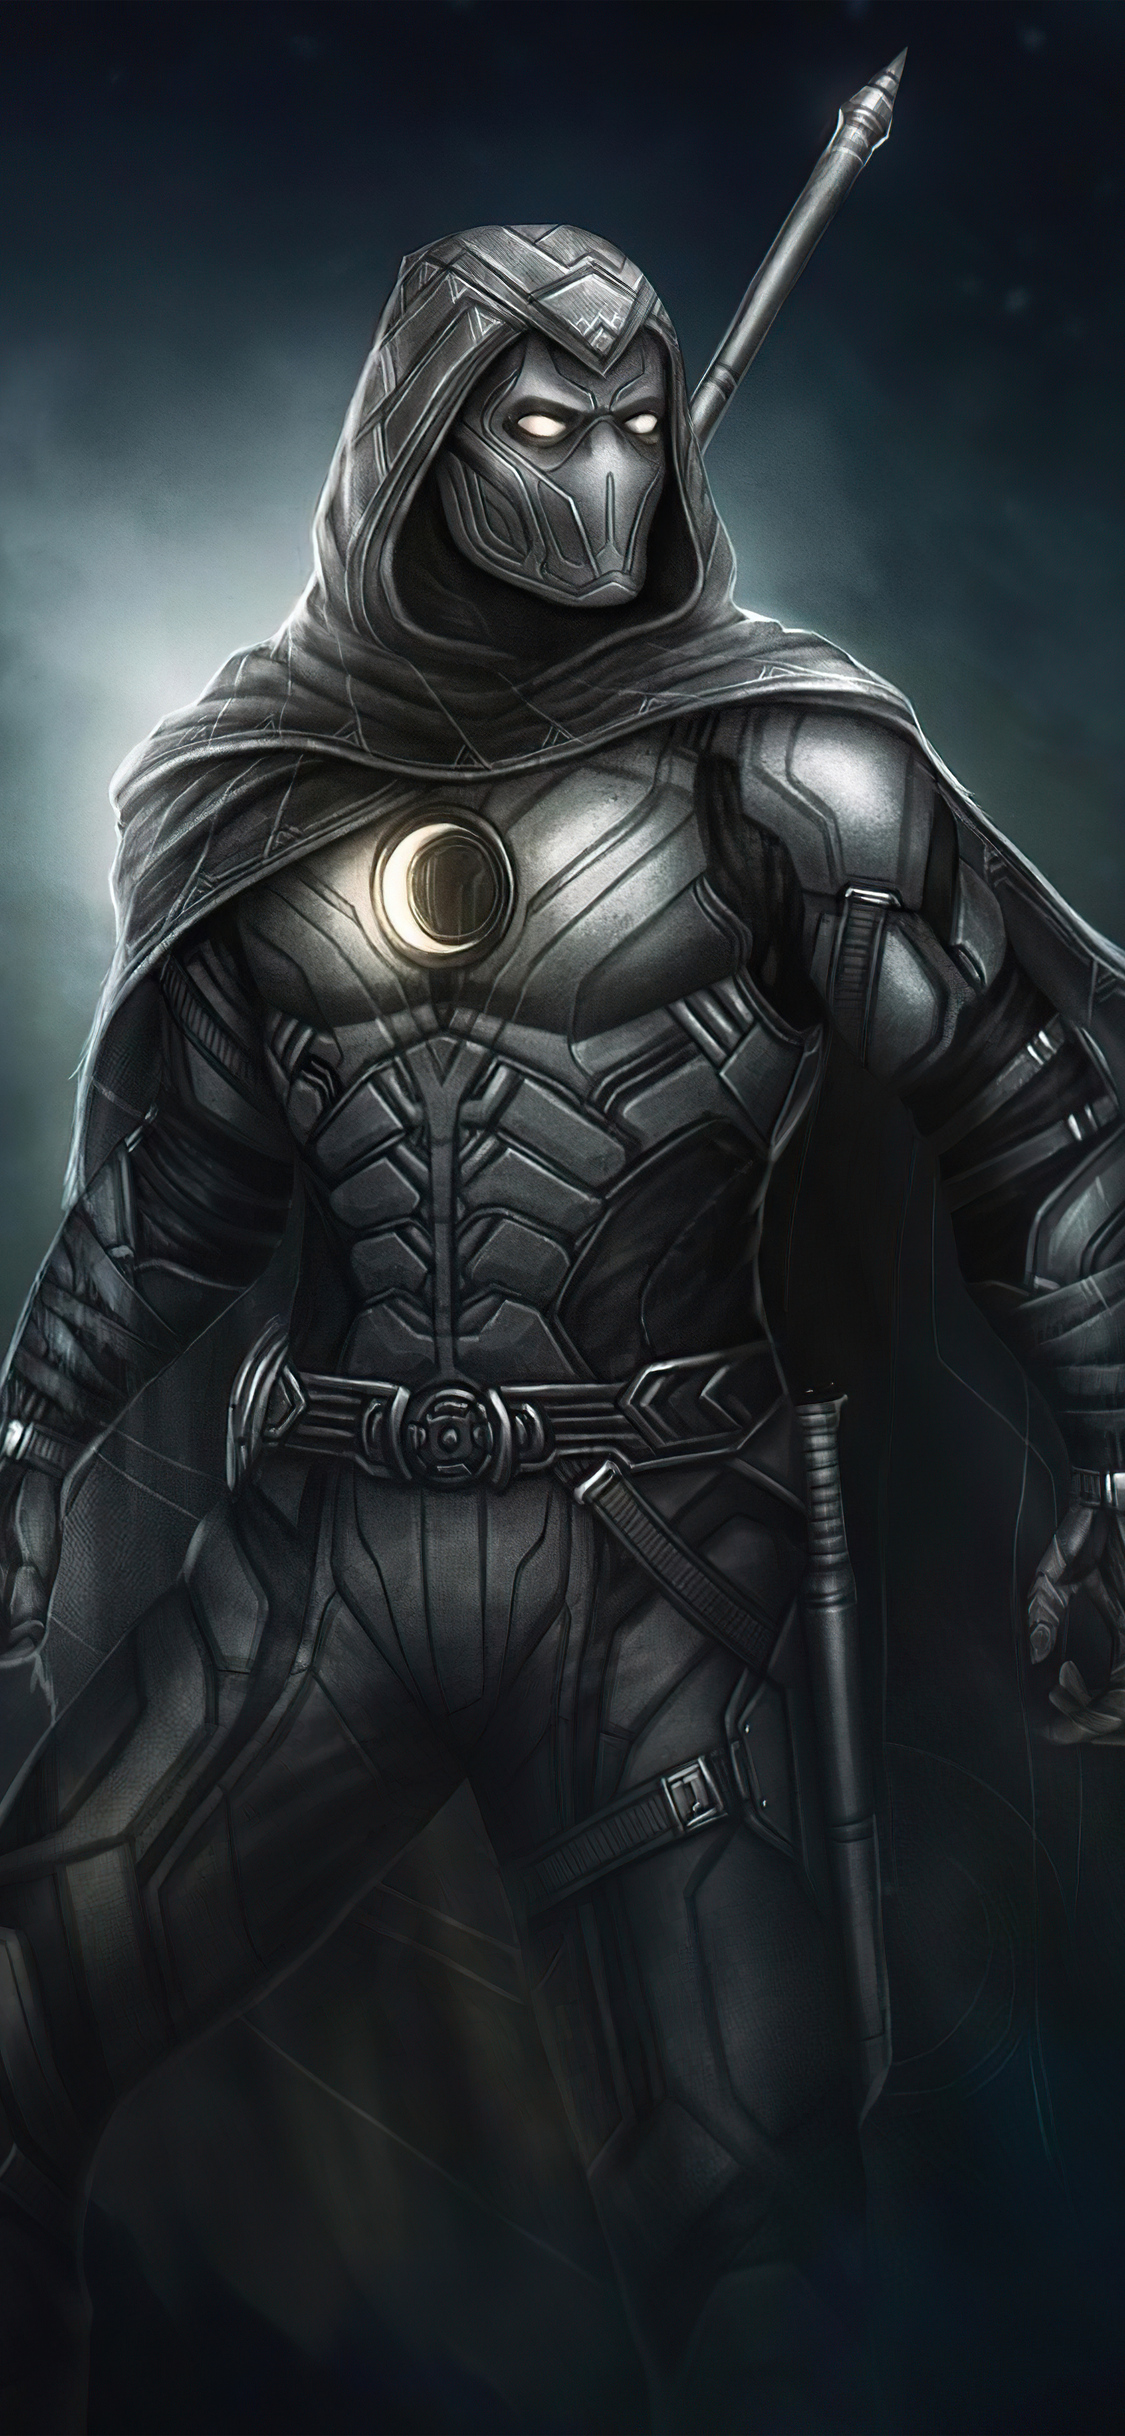 1125x2436 Moon Knight Fictional Superhero 4k Iphone XS,Iphone 10,Iphone X  HD 4k Wallpapers, Images, Backgrounds, Photos and Pictures